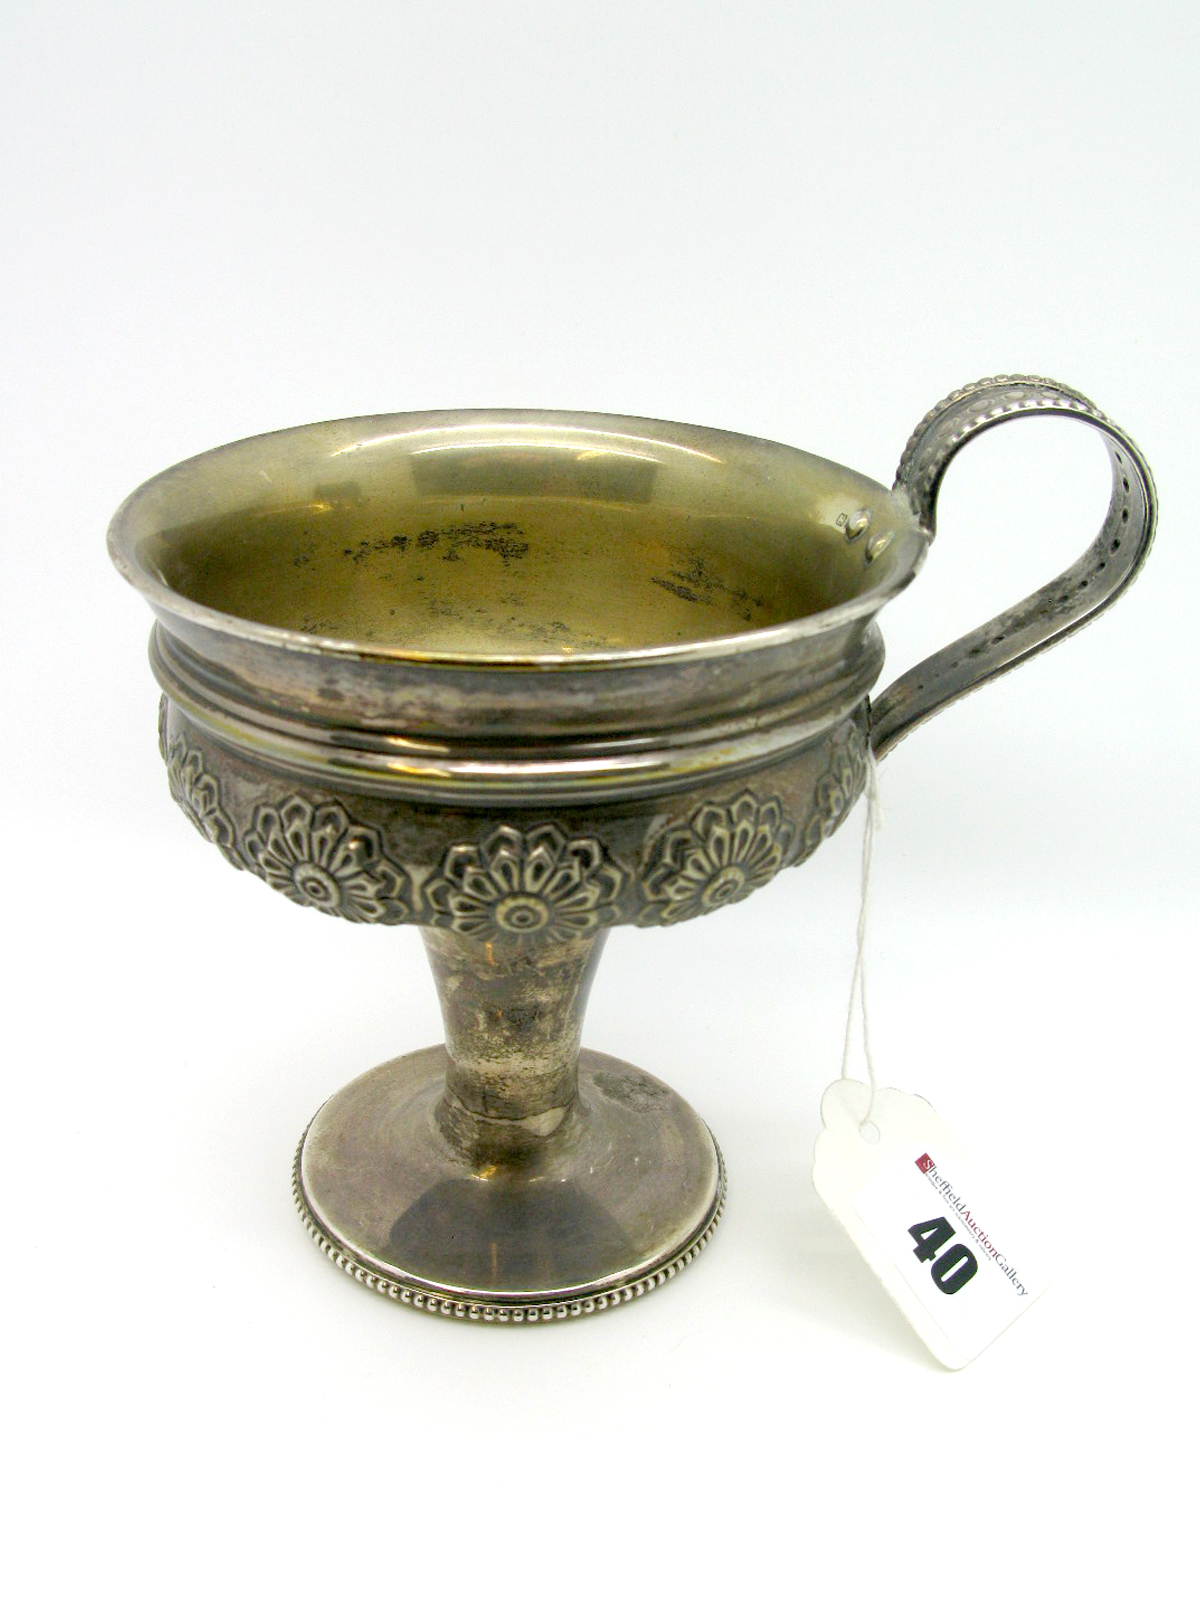 A Decorative Hallmarked Silver Pedestal Cup, Nathan & Hayes, Chester 1907, the shallow circular bowl